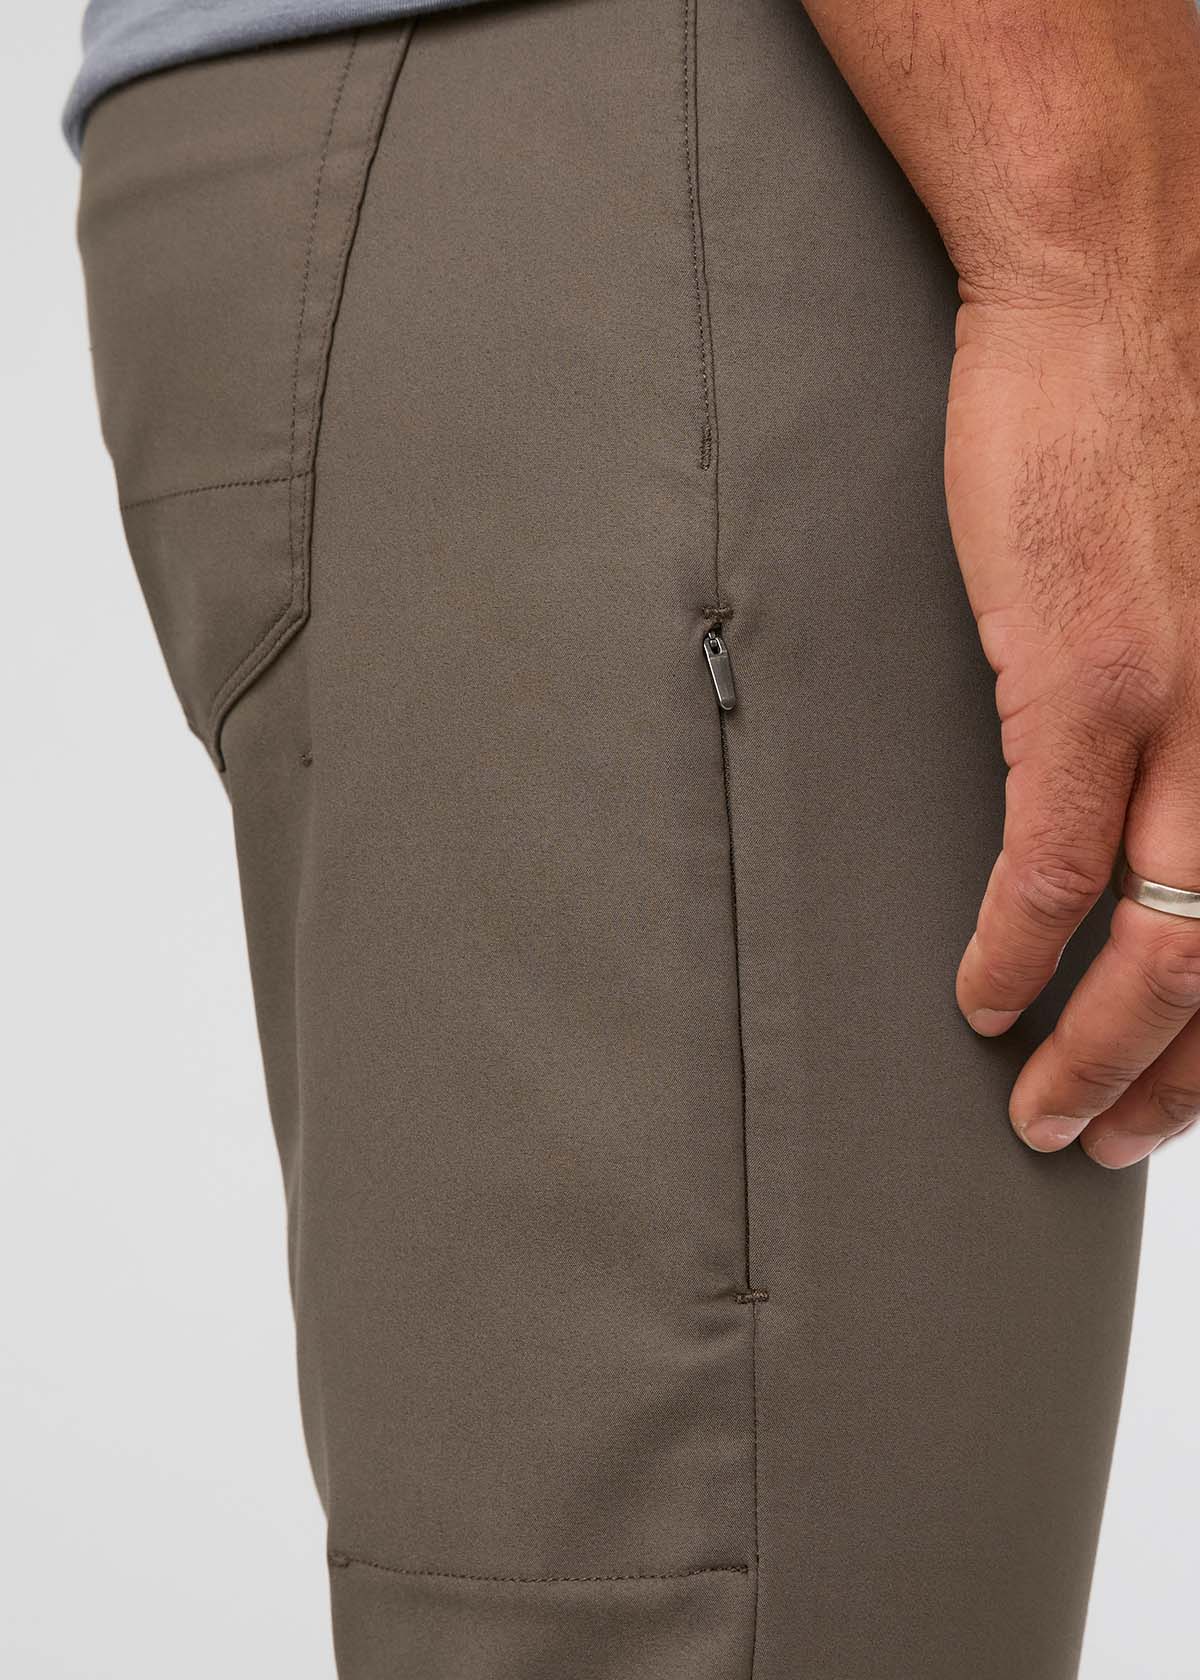 mens grey-green relaxed fit stretch pants thigh zip pocket